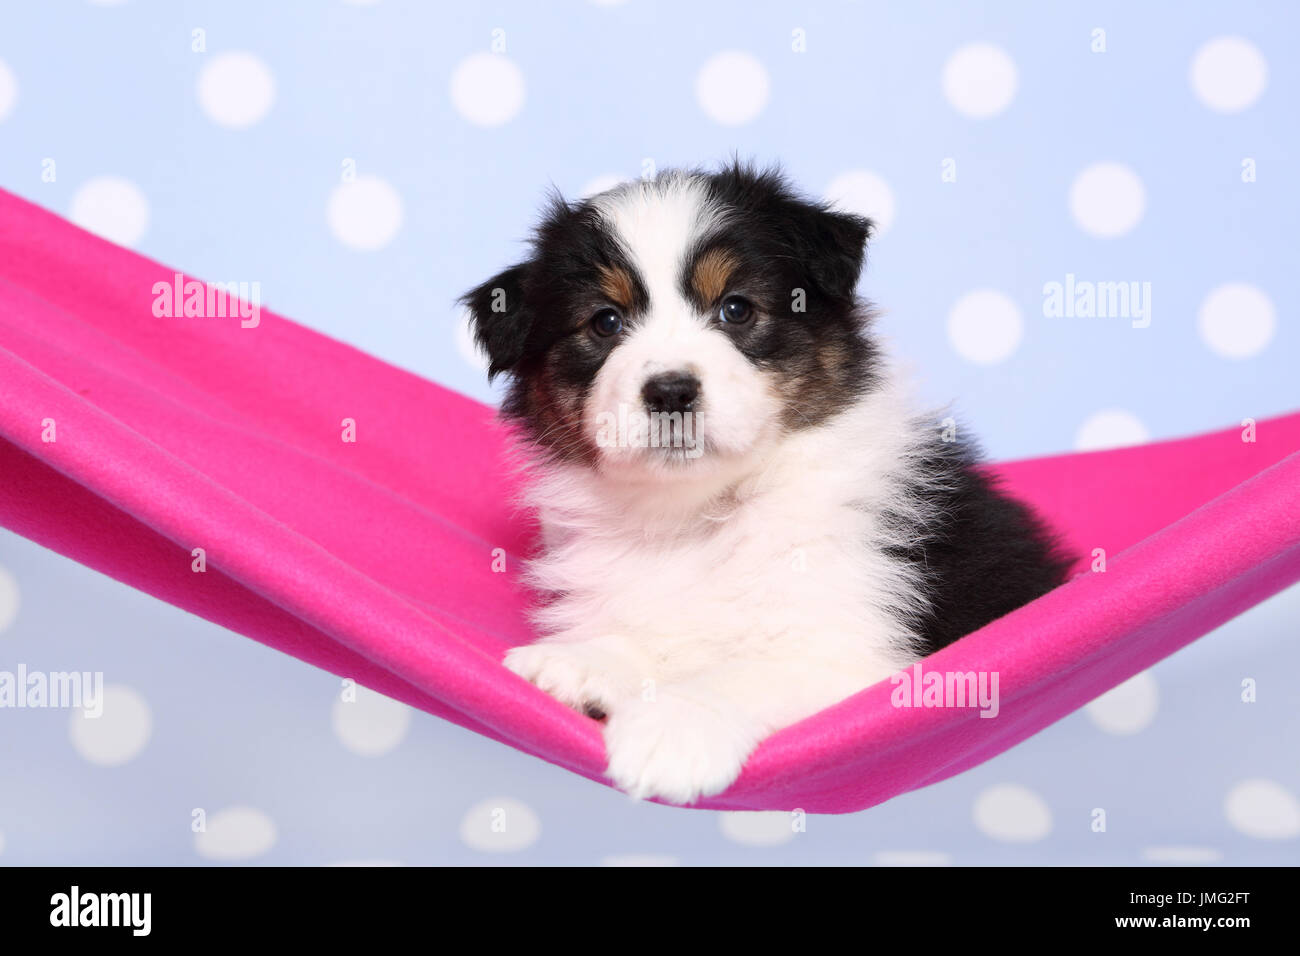 Australian Shepherd. Puppy (6 weeks old) lying in a pink hammock. Studio picture against a blue background with white polka dots. Germany Stock Photo